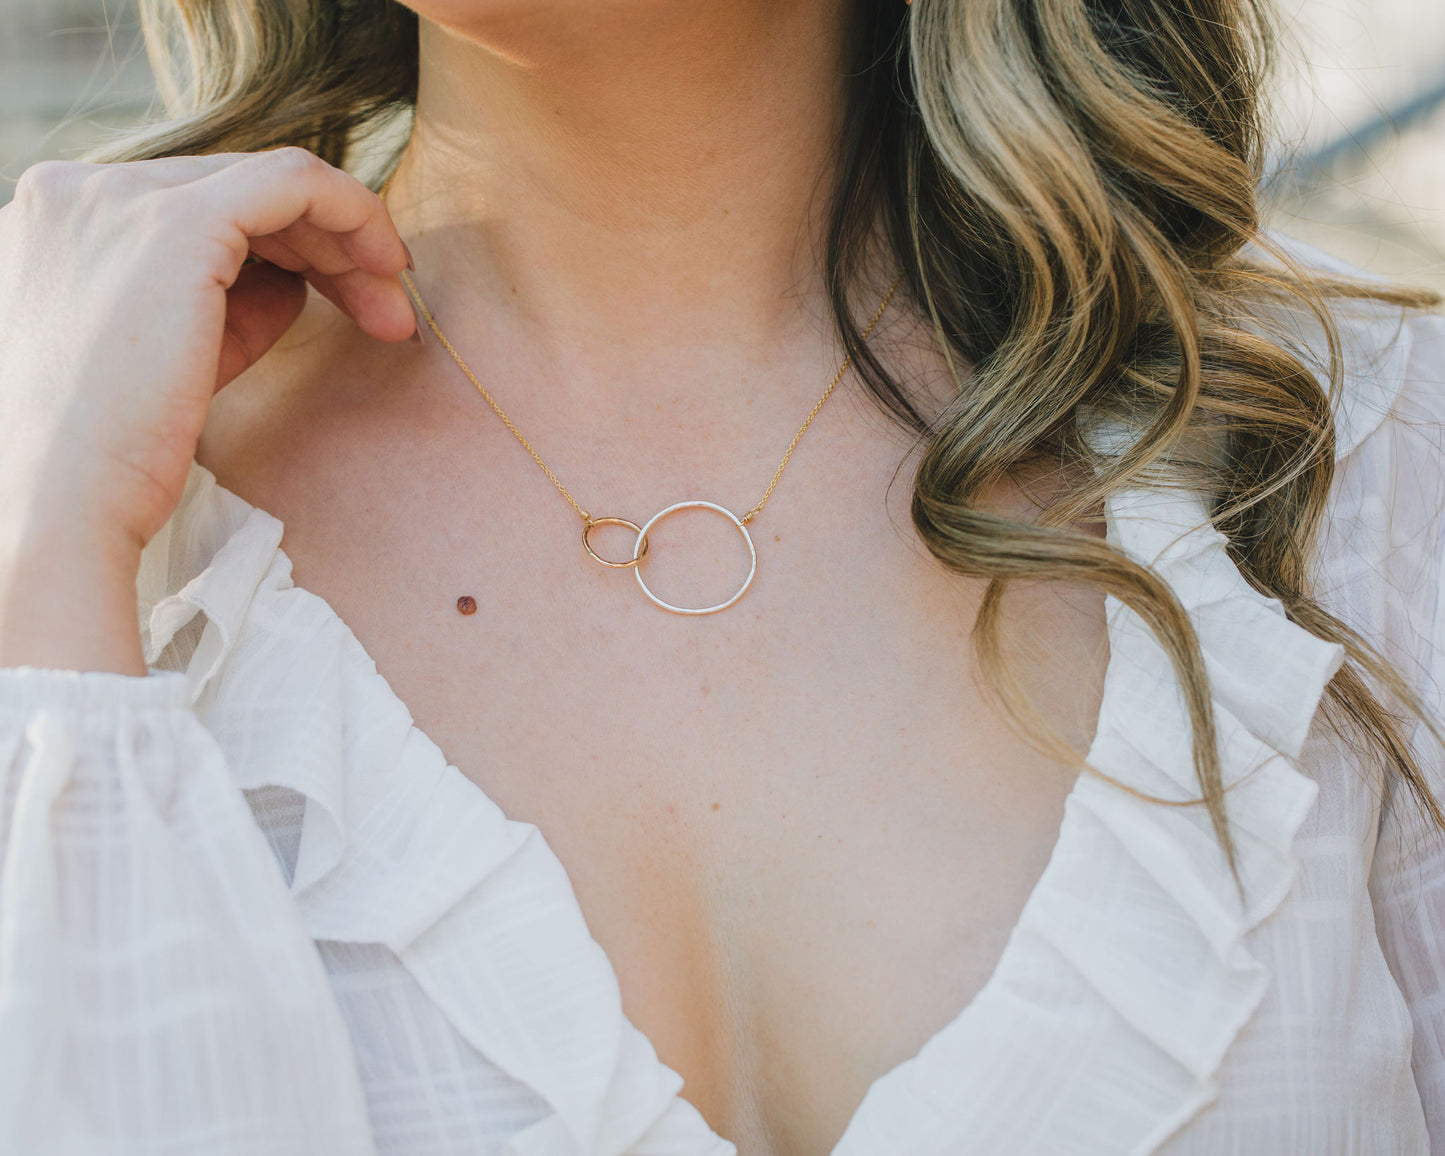 The larger circle measures approximately 1 inch across and is 925 Sterling Silver. The smaller circle measures approximately ½ inch across and is 14 karat Gold Filled. Our Barely There 1.1mm chain in 14 karat Gold Filled is expertly wire wrapped.